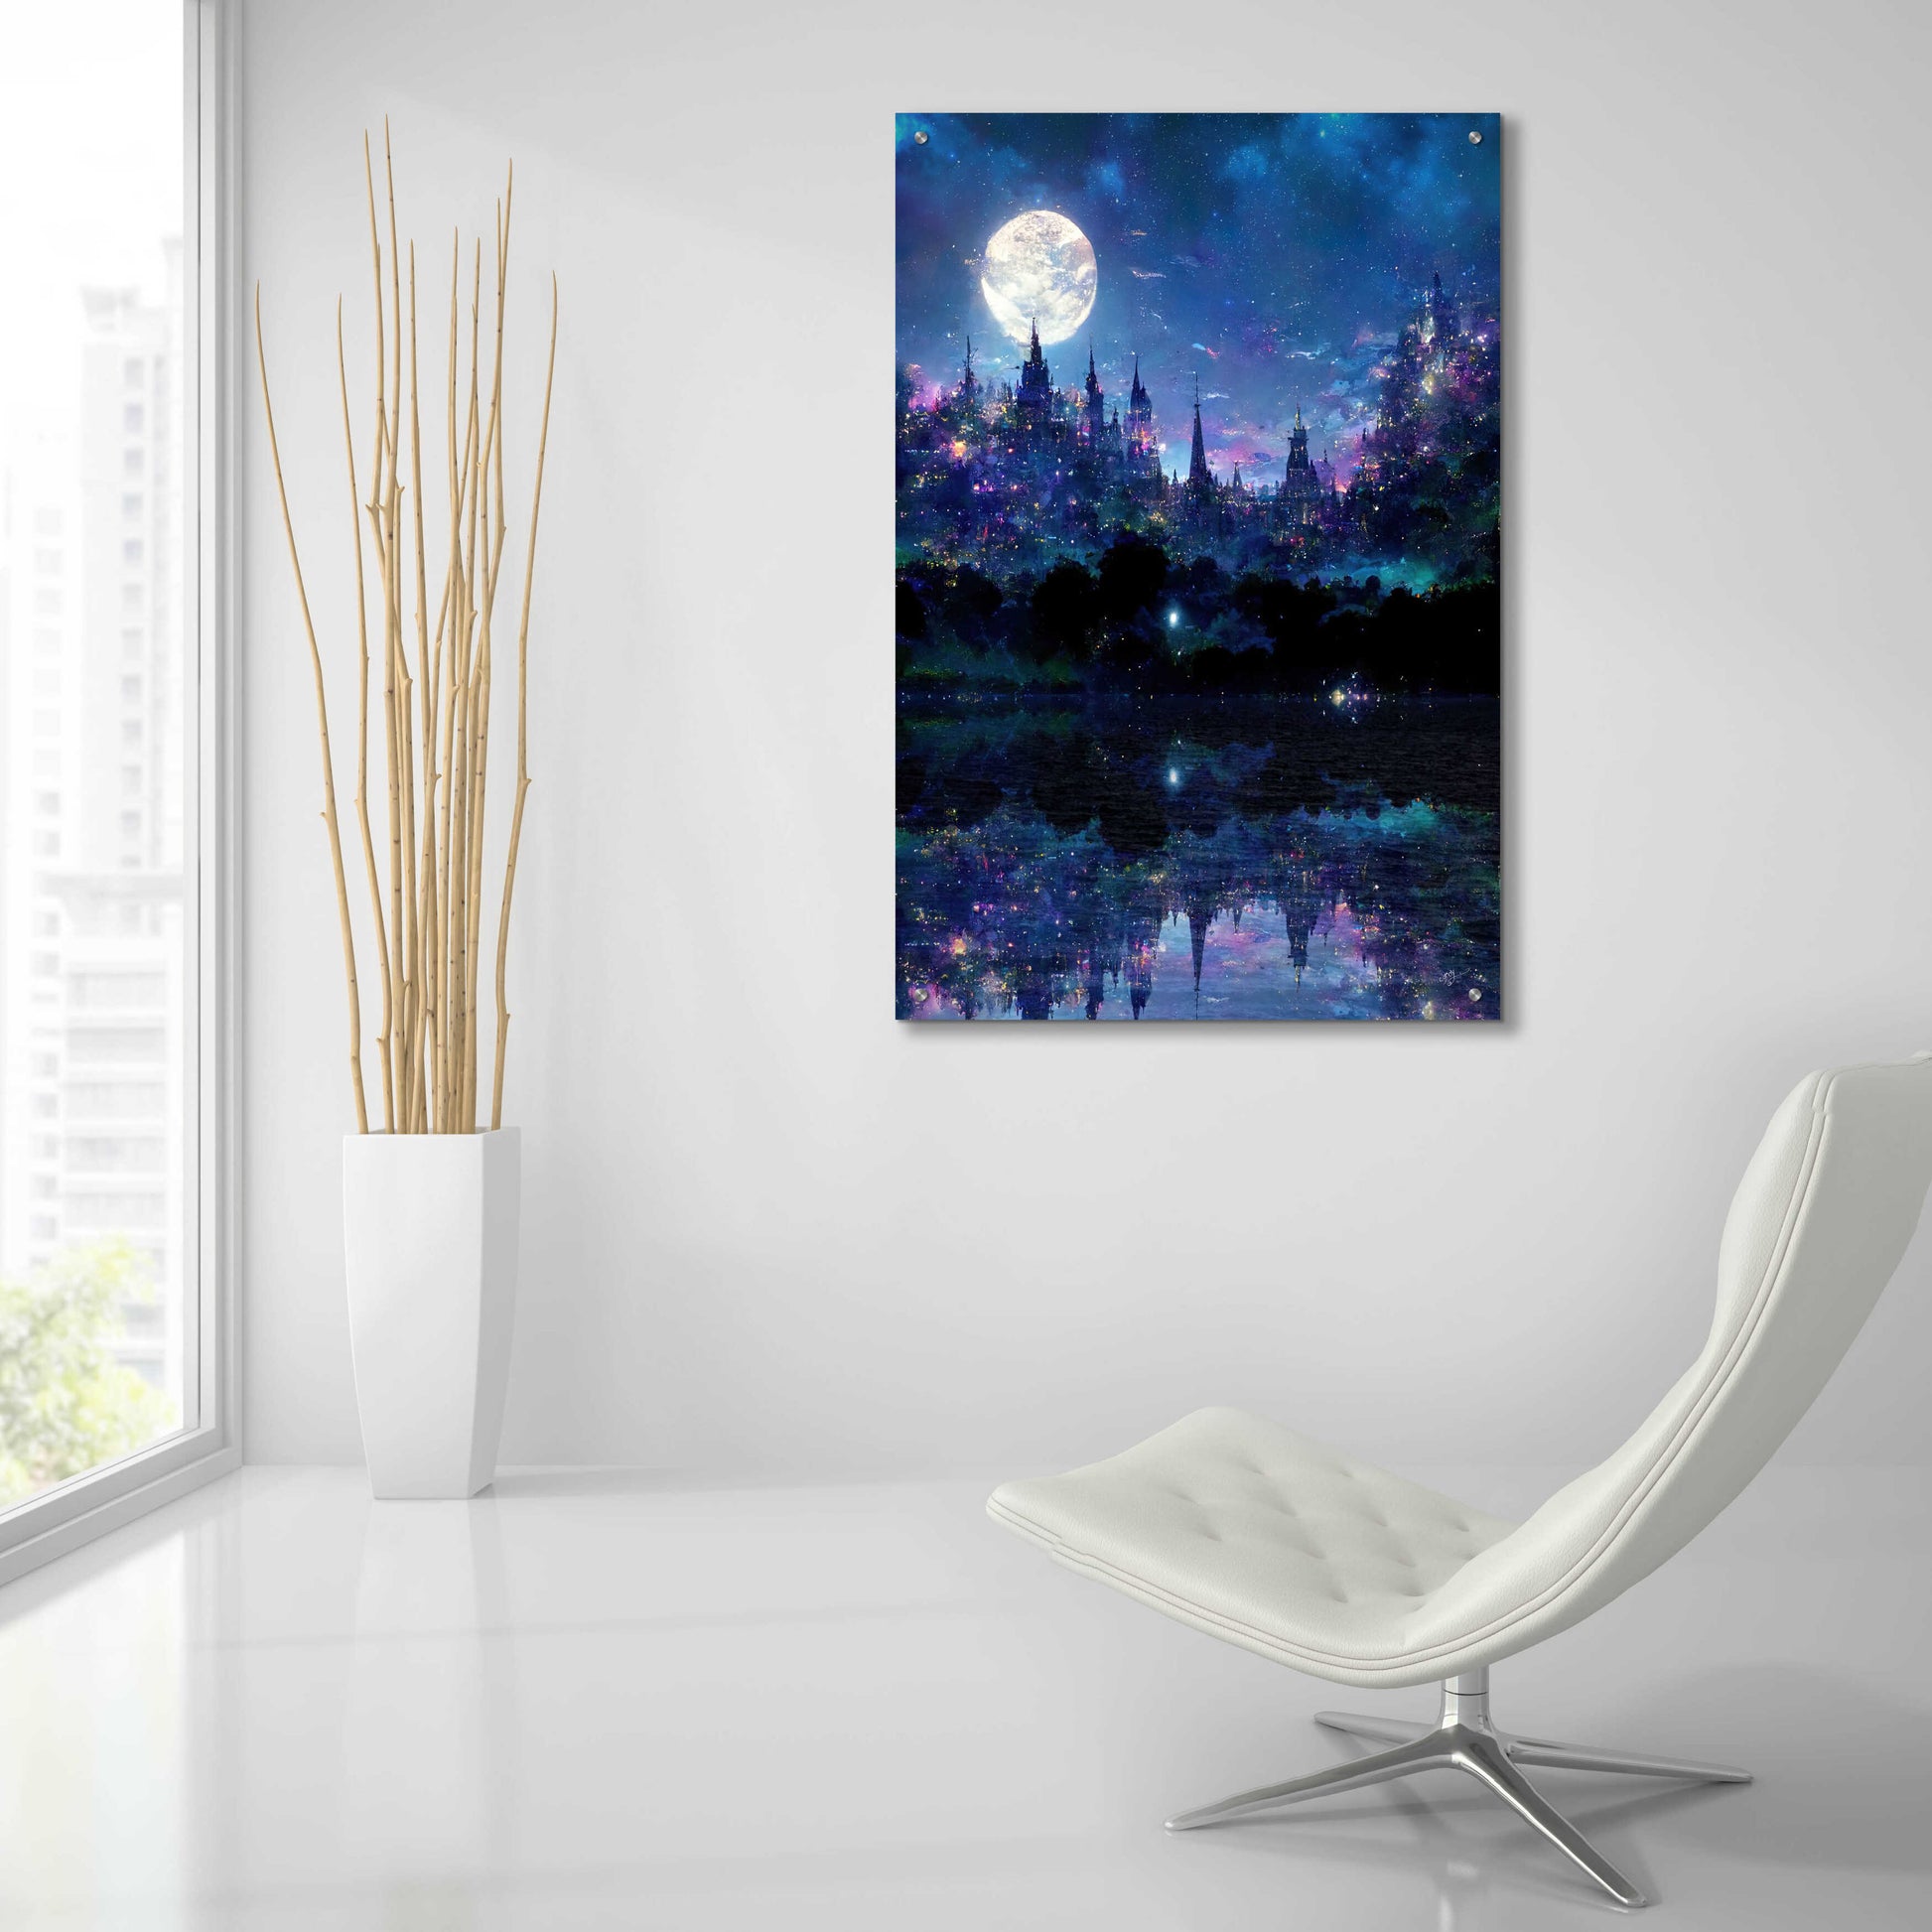 Epic Art 'Glowing In The Night' by Cameron Gray, Acrylic Glass Wall Art,24x36